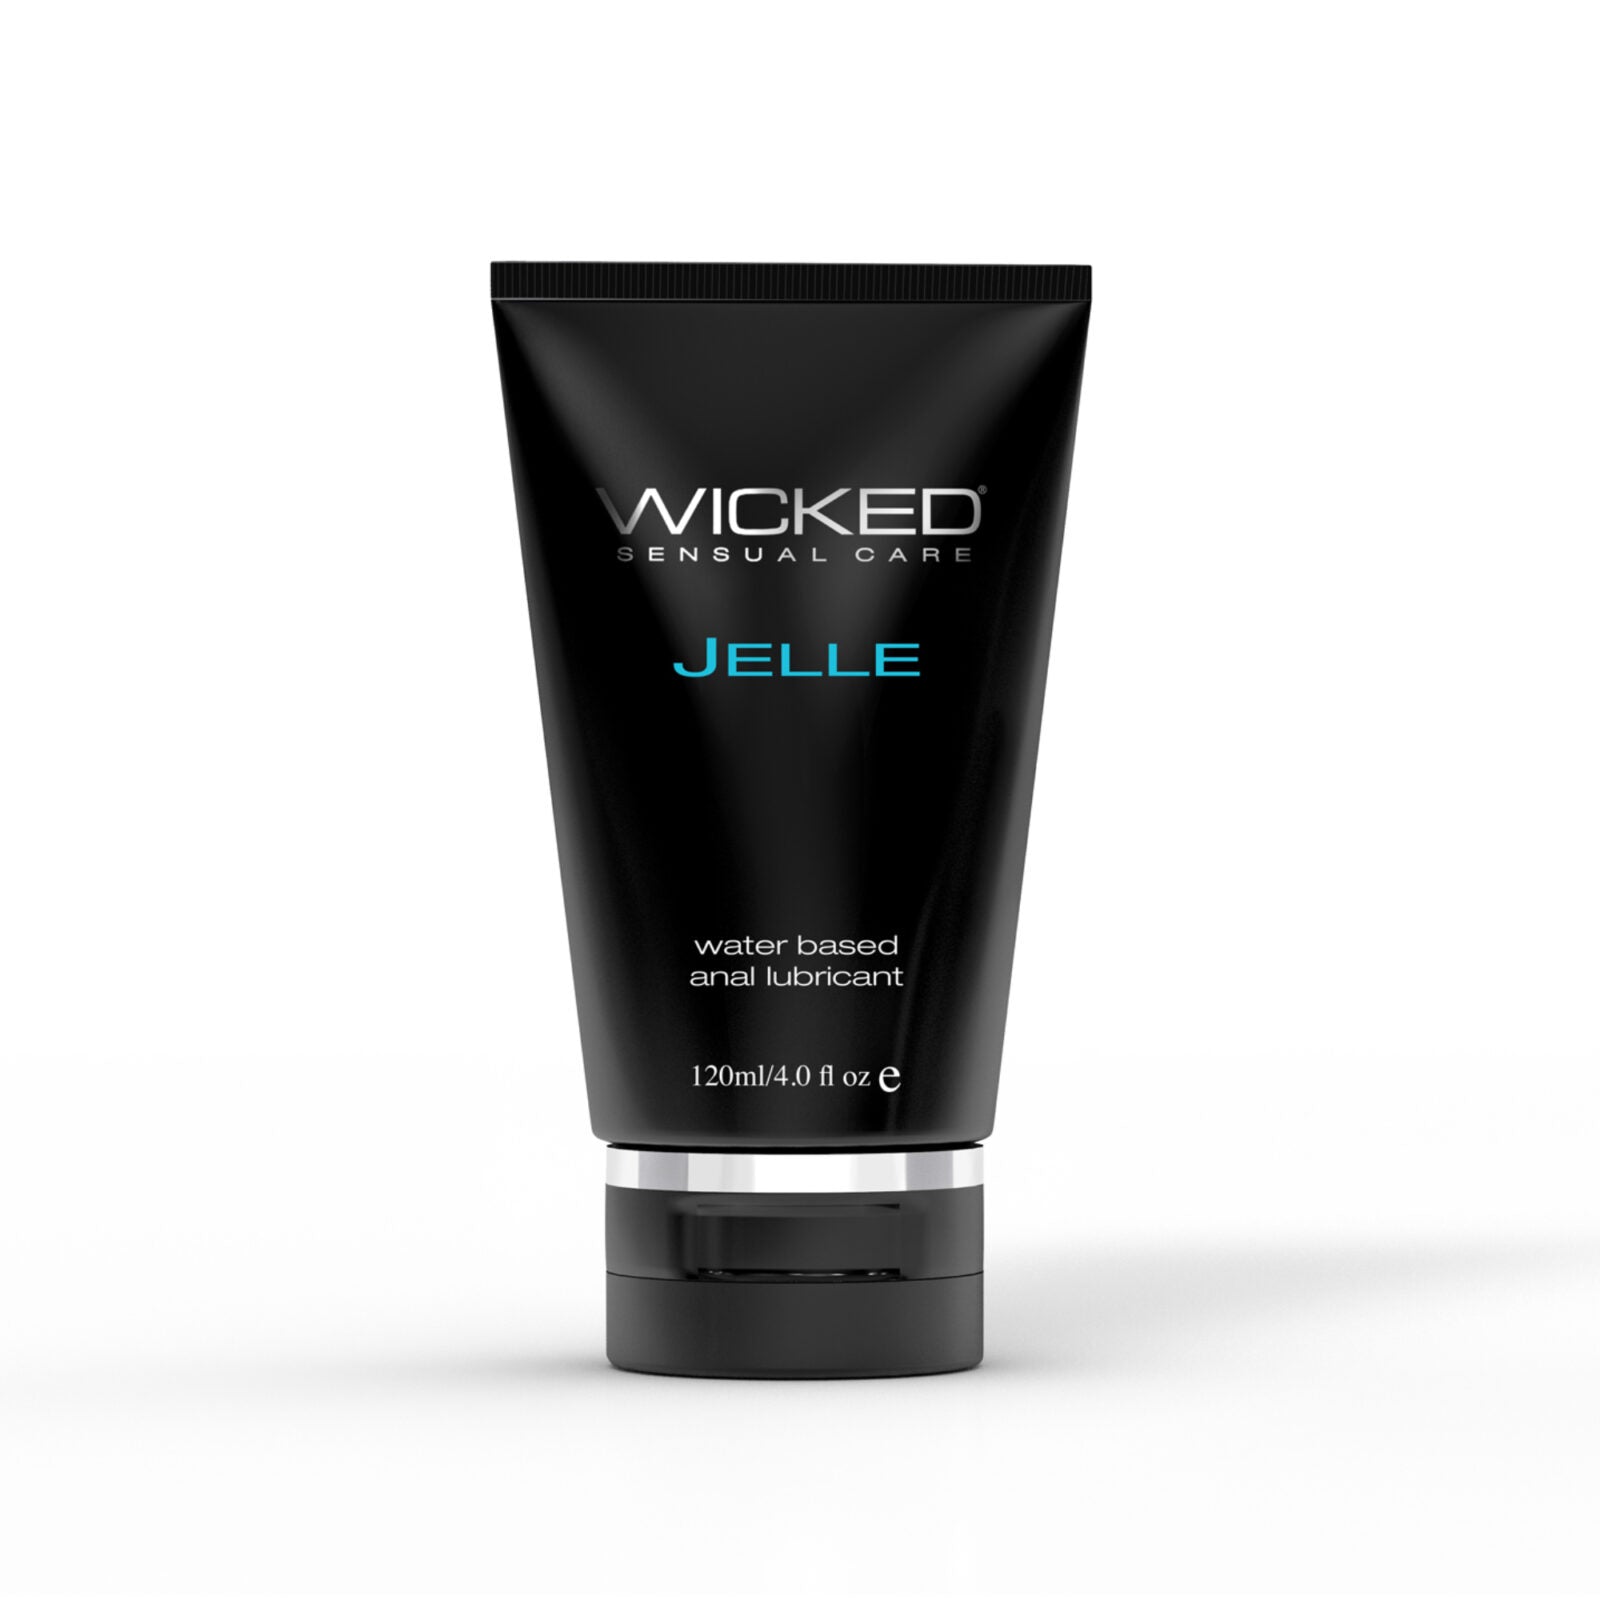 Photo of the front of the tube of Wicked Sensual Care's Jelle Water Based Anal Lubricant (4oz).